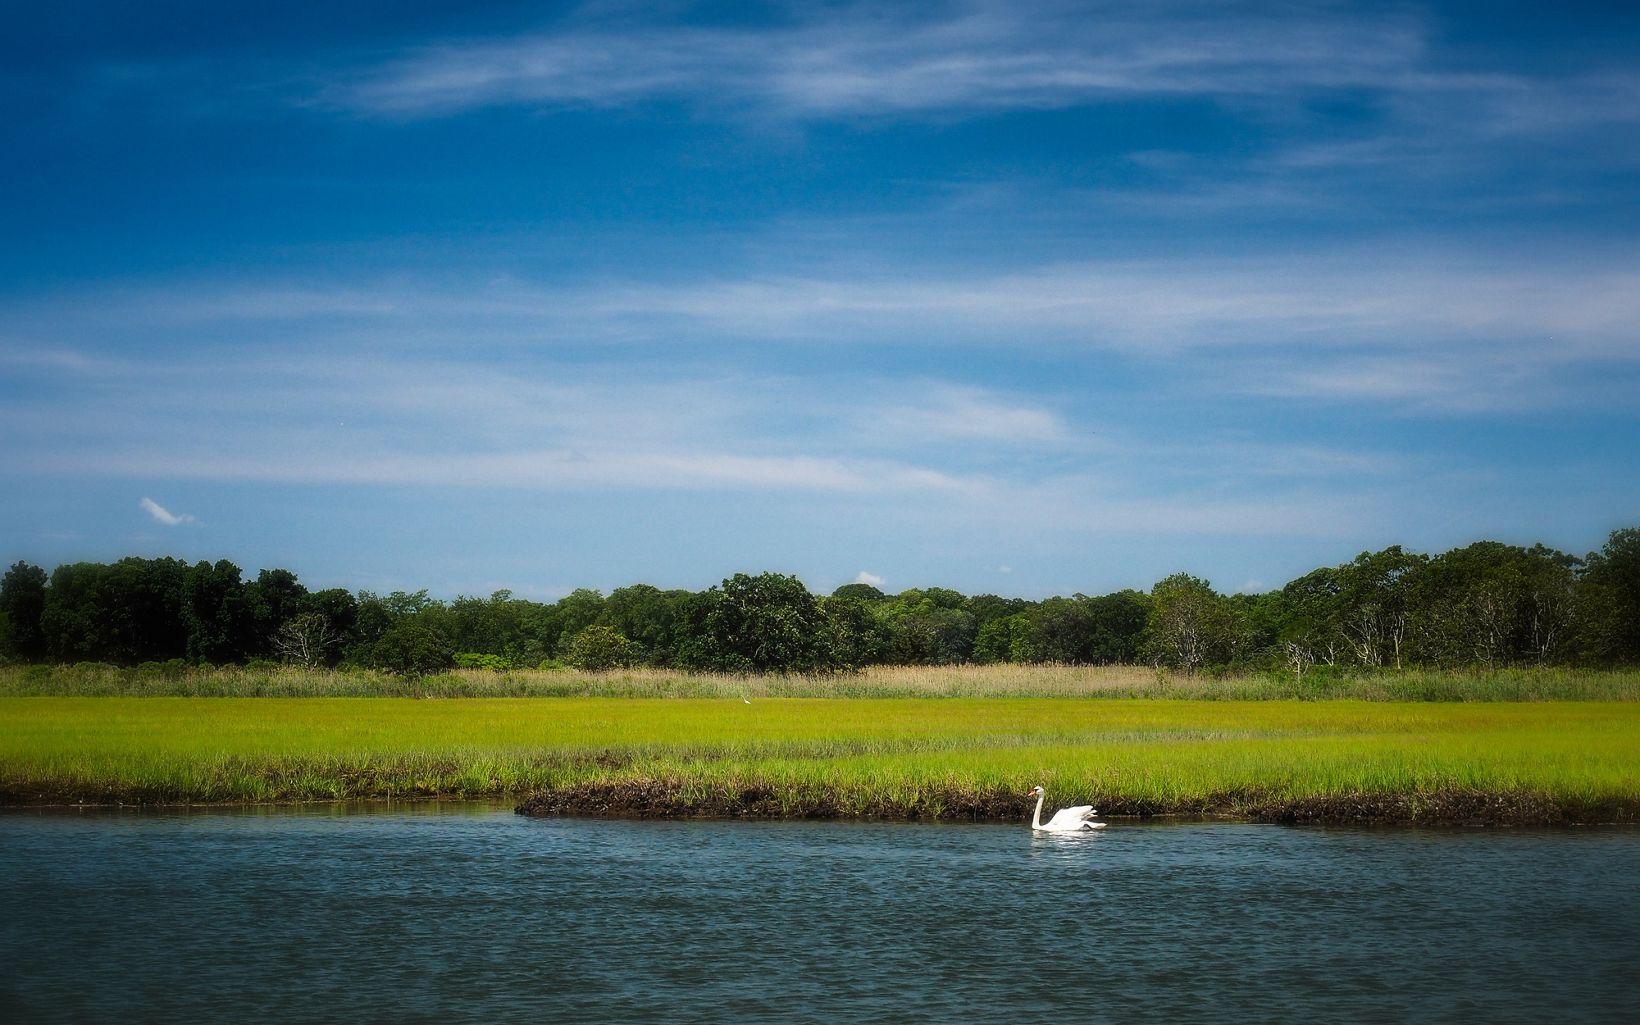 A white swan swimming in the water with salt marsh and trees in the background under a blue sky.